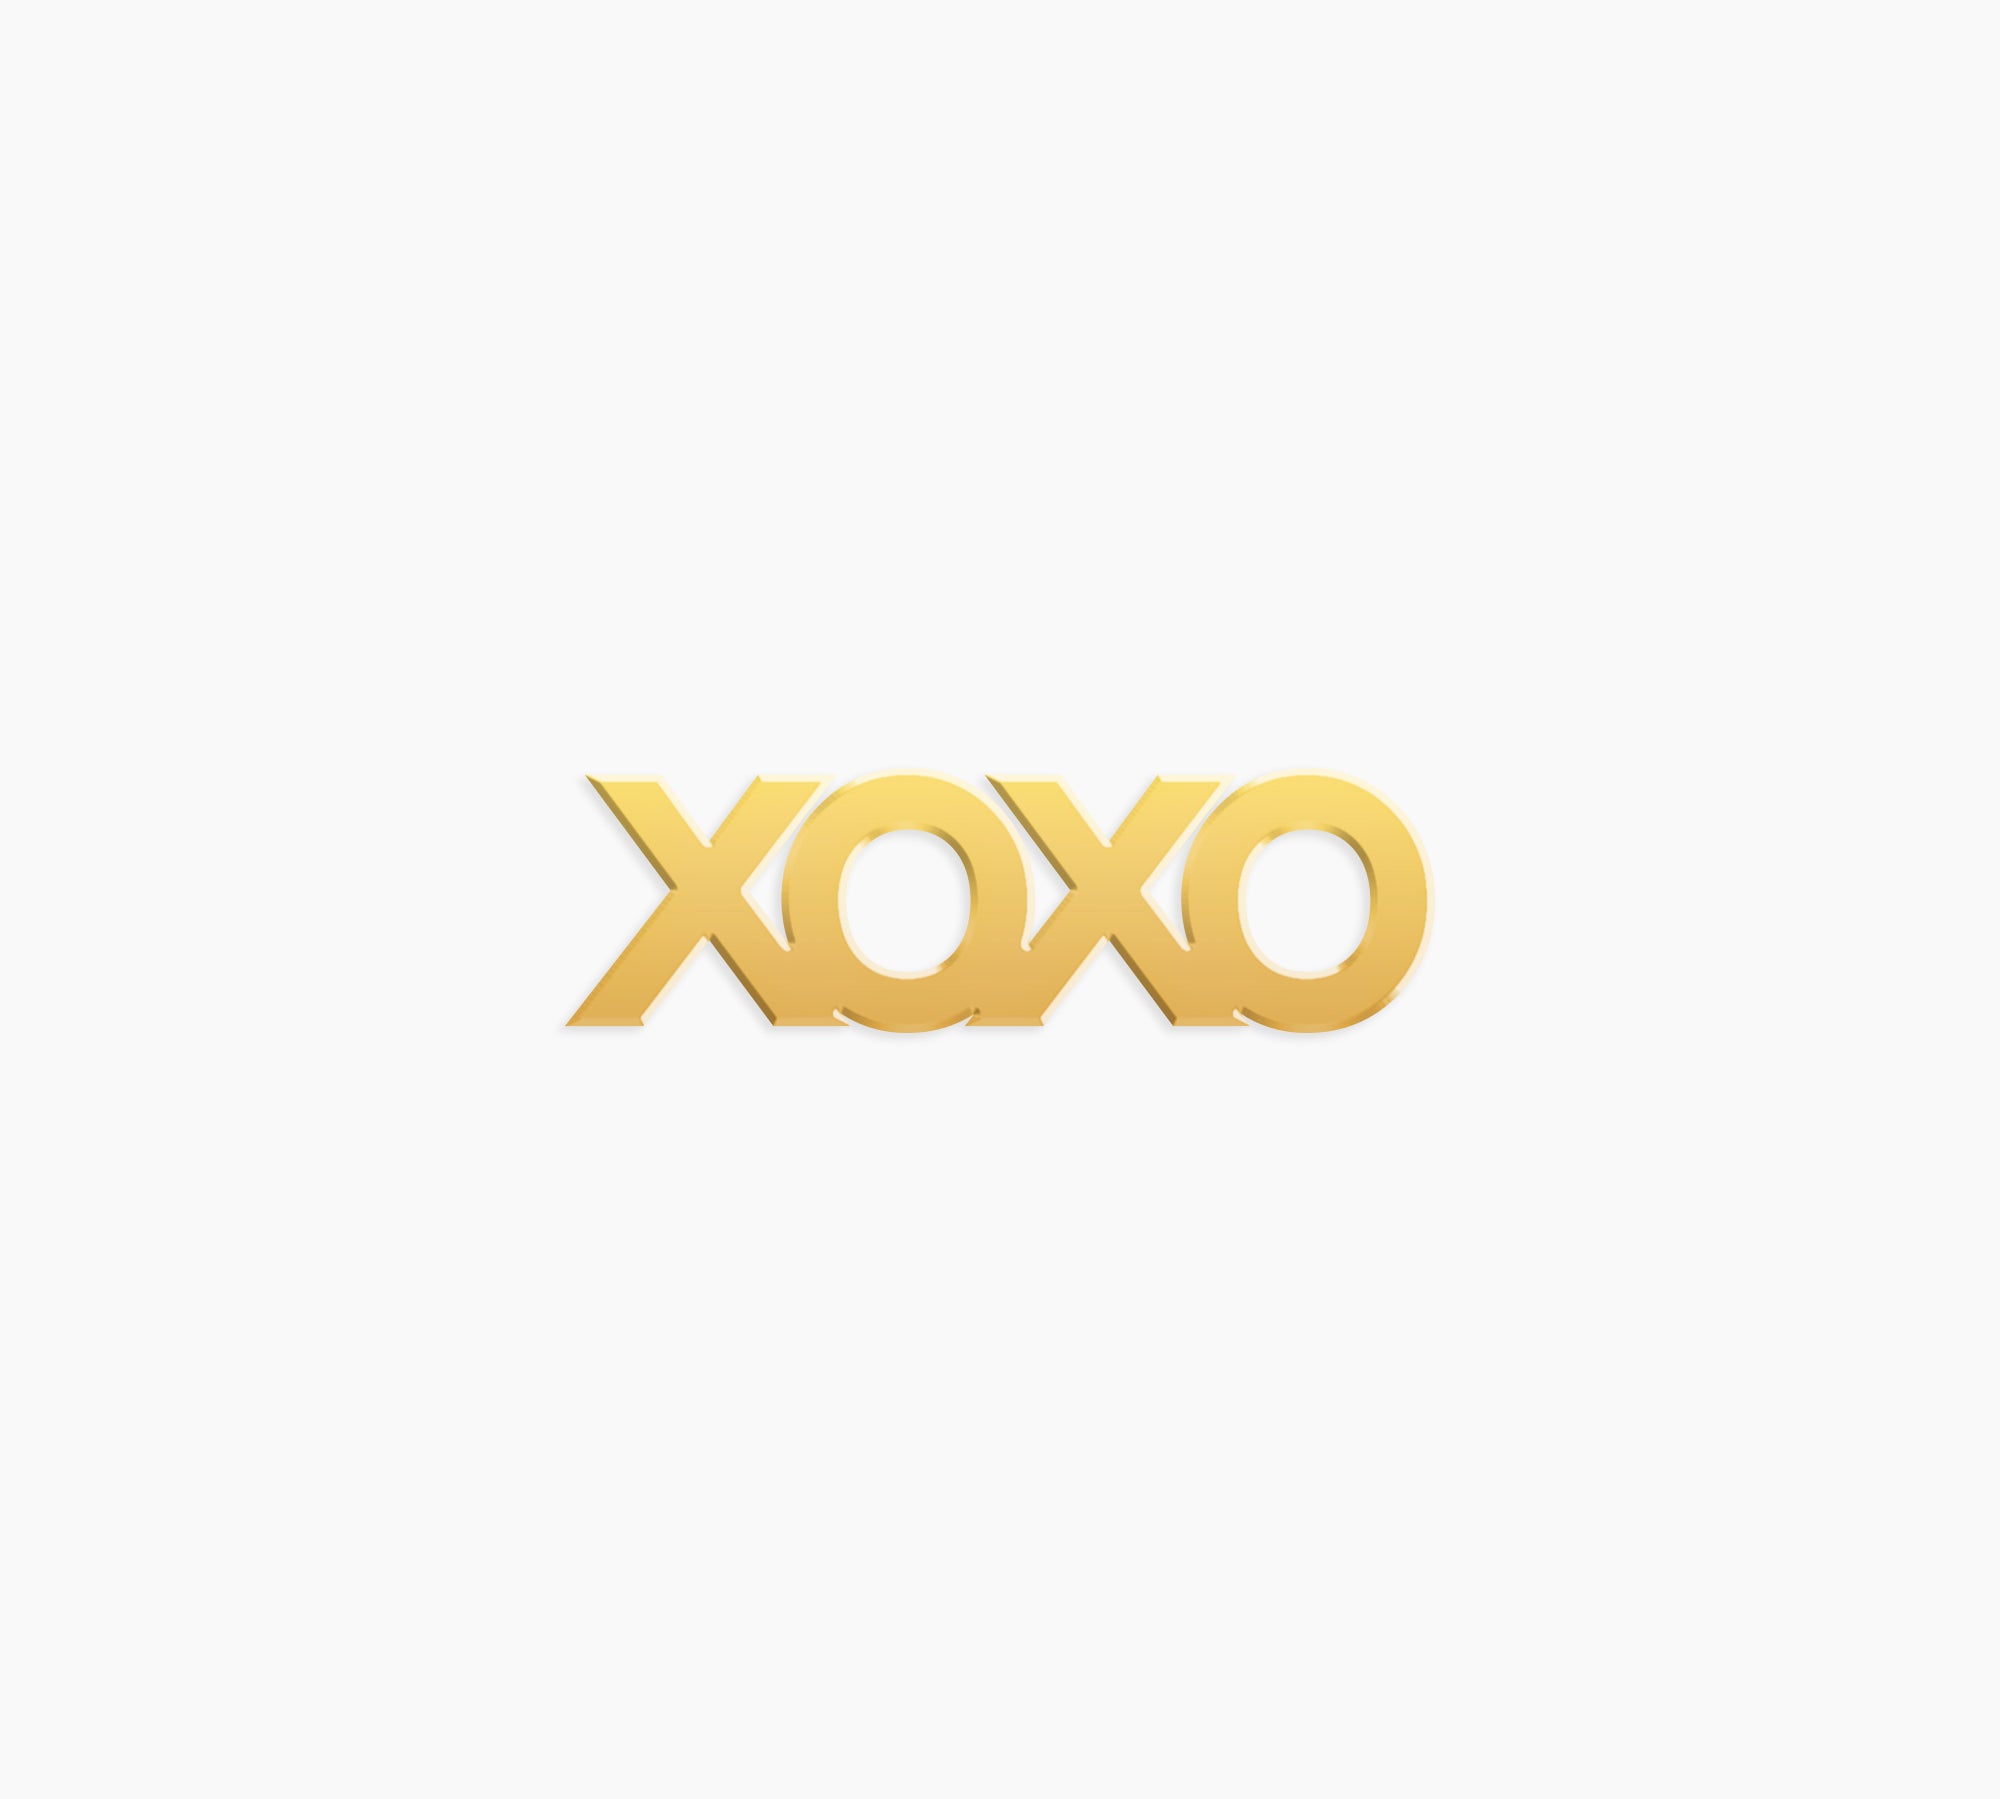 XOXO Kisses and Hugs Word Charm - High Quality, Affordable, Empowering, Self Love, Mantra Individual Charm for a Custom Locket - Available in Gold and Silver - Made in USA - Brevity Jewelry